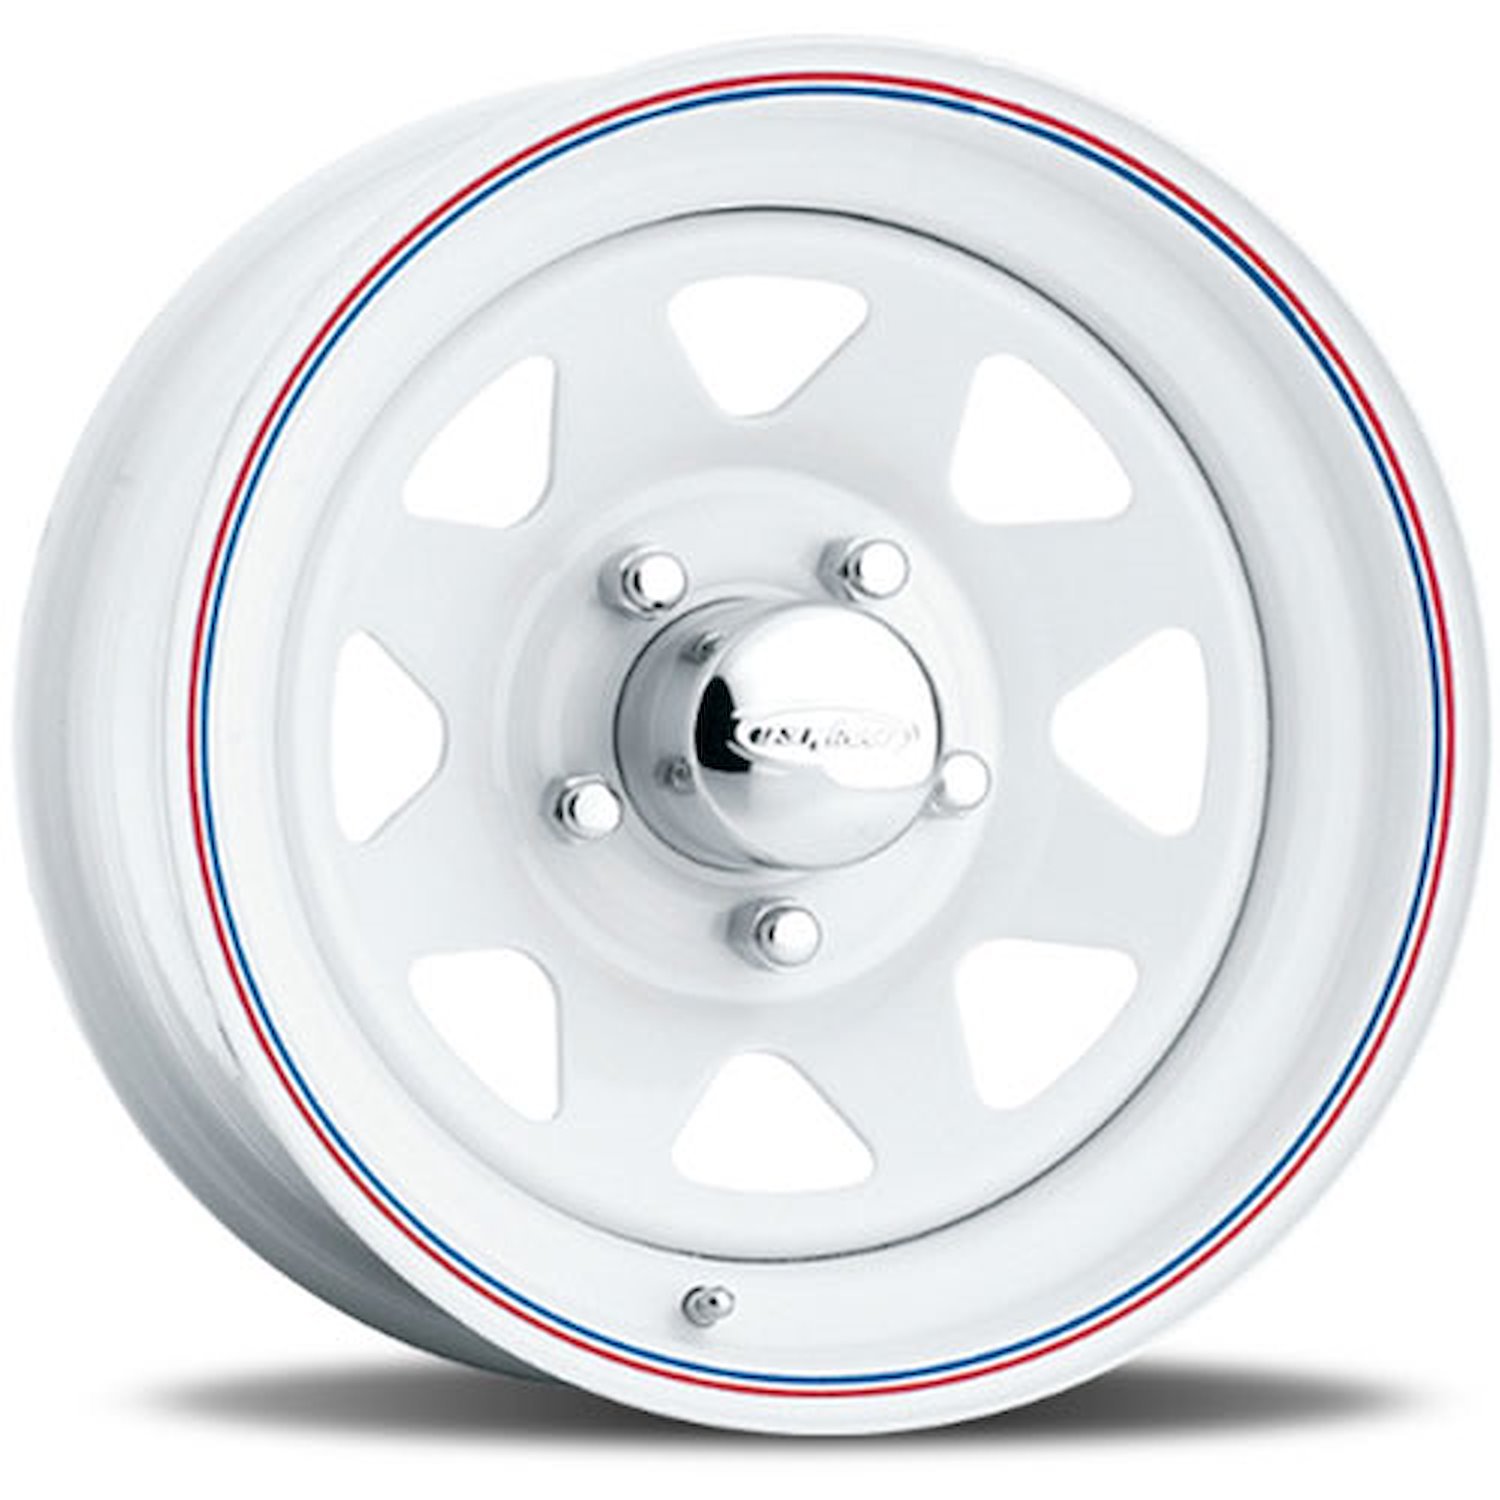 WHITE 8SPOKE 15 x 10 5 x 55 Bolt Circle 375 Back Spacing 44 offset 428 Center Bore 1500 lbs Load Rating